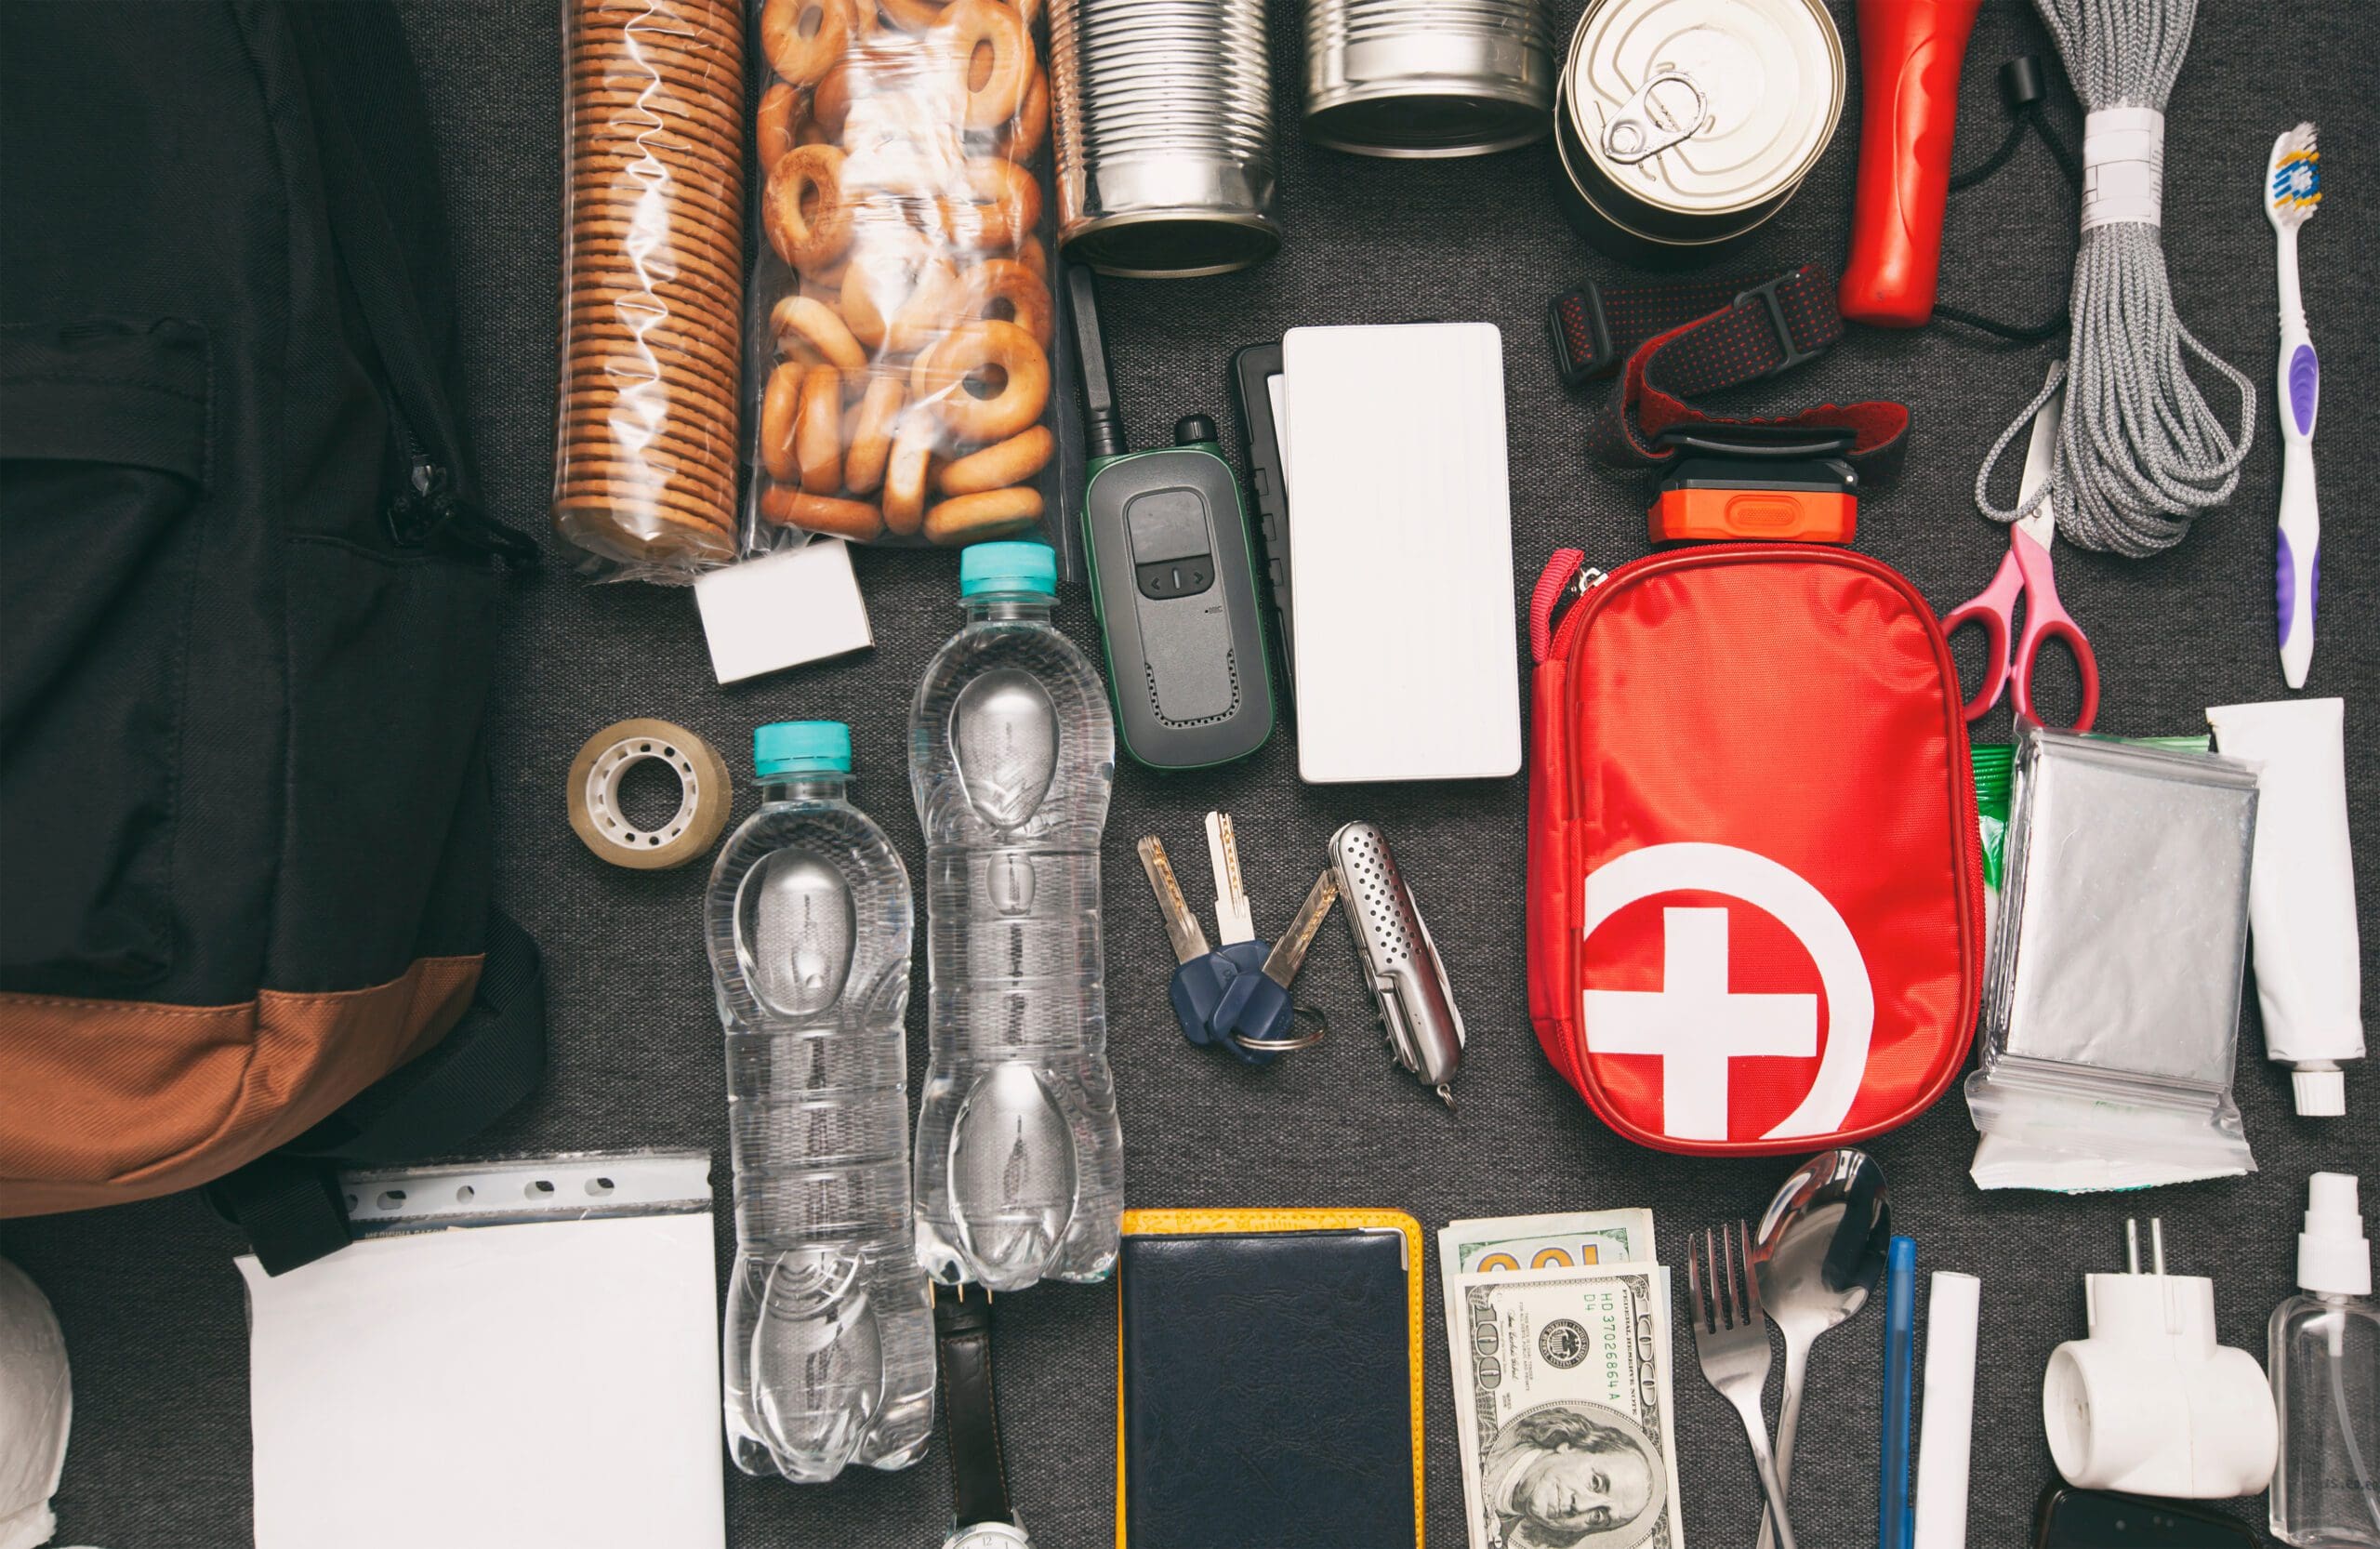 How to Prepare an Emergency Kit for Any Disaster